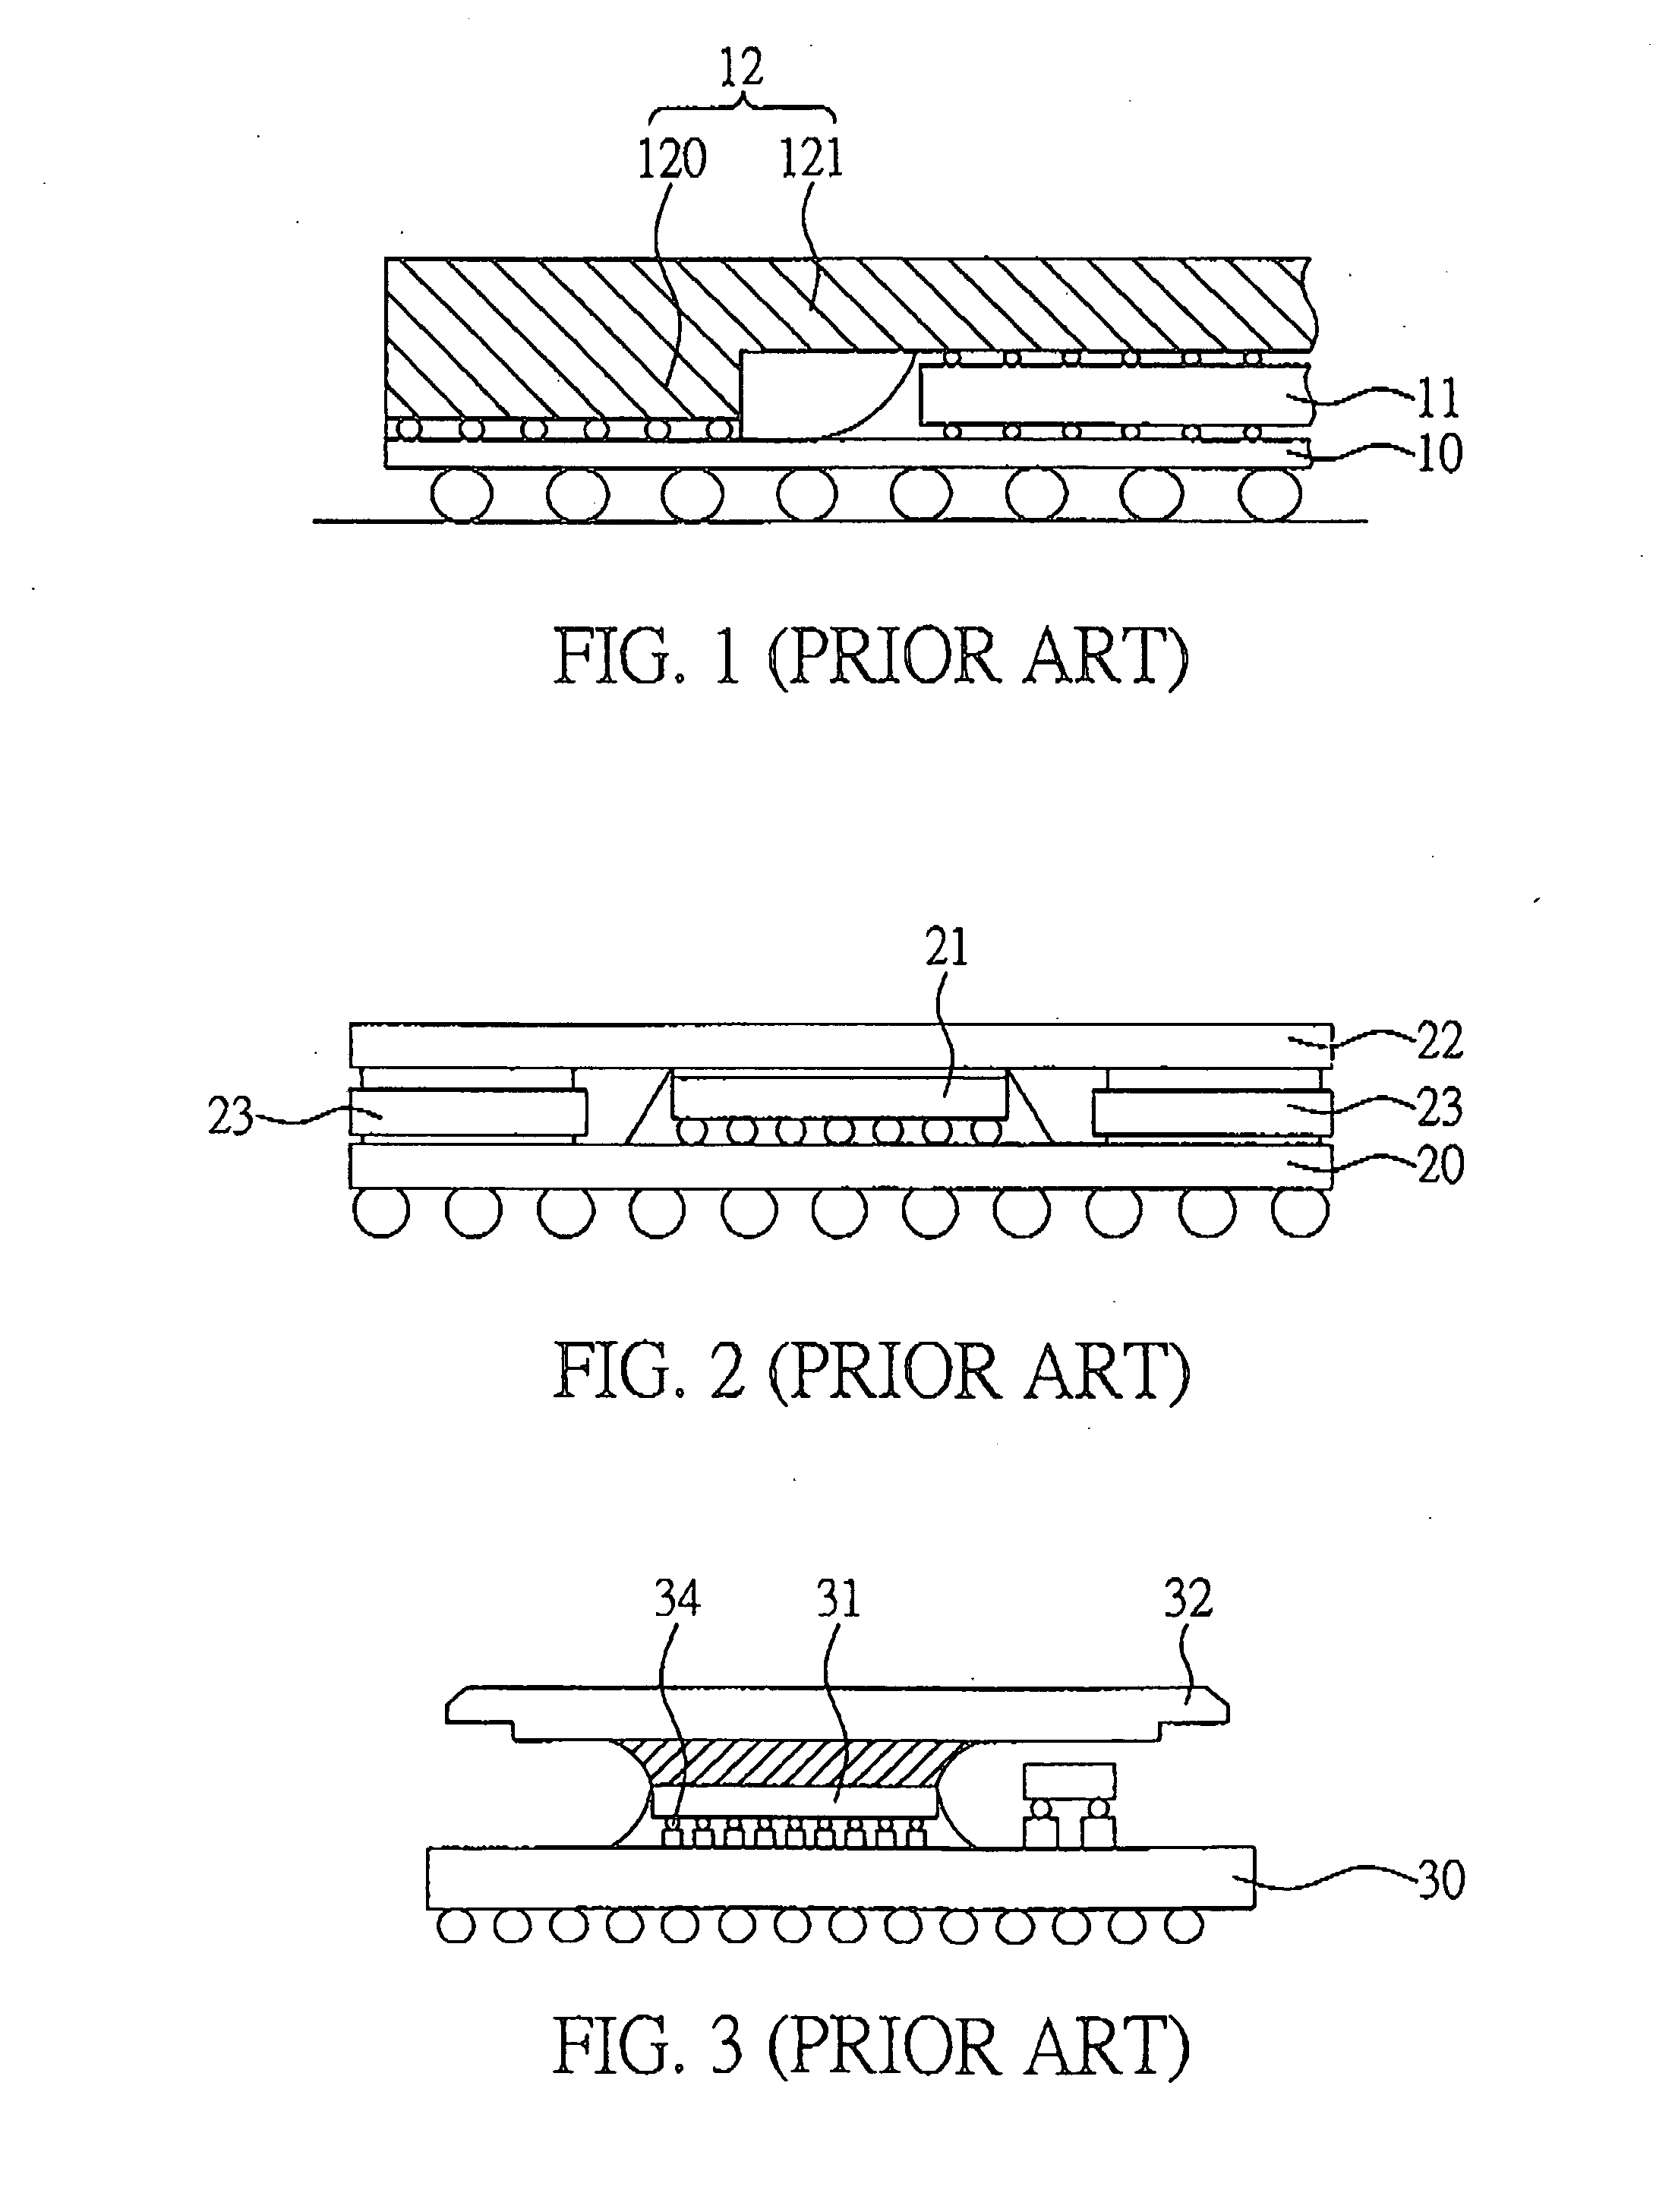 Flip-chip semiconductor device